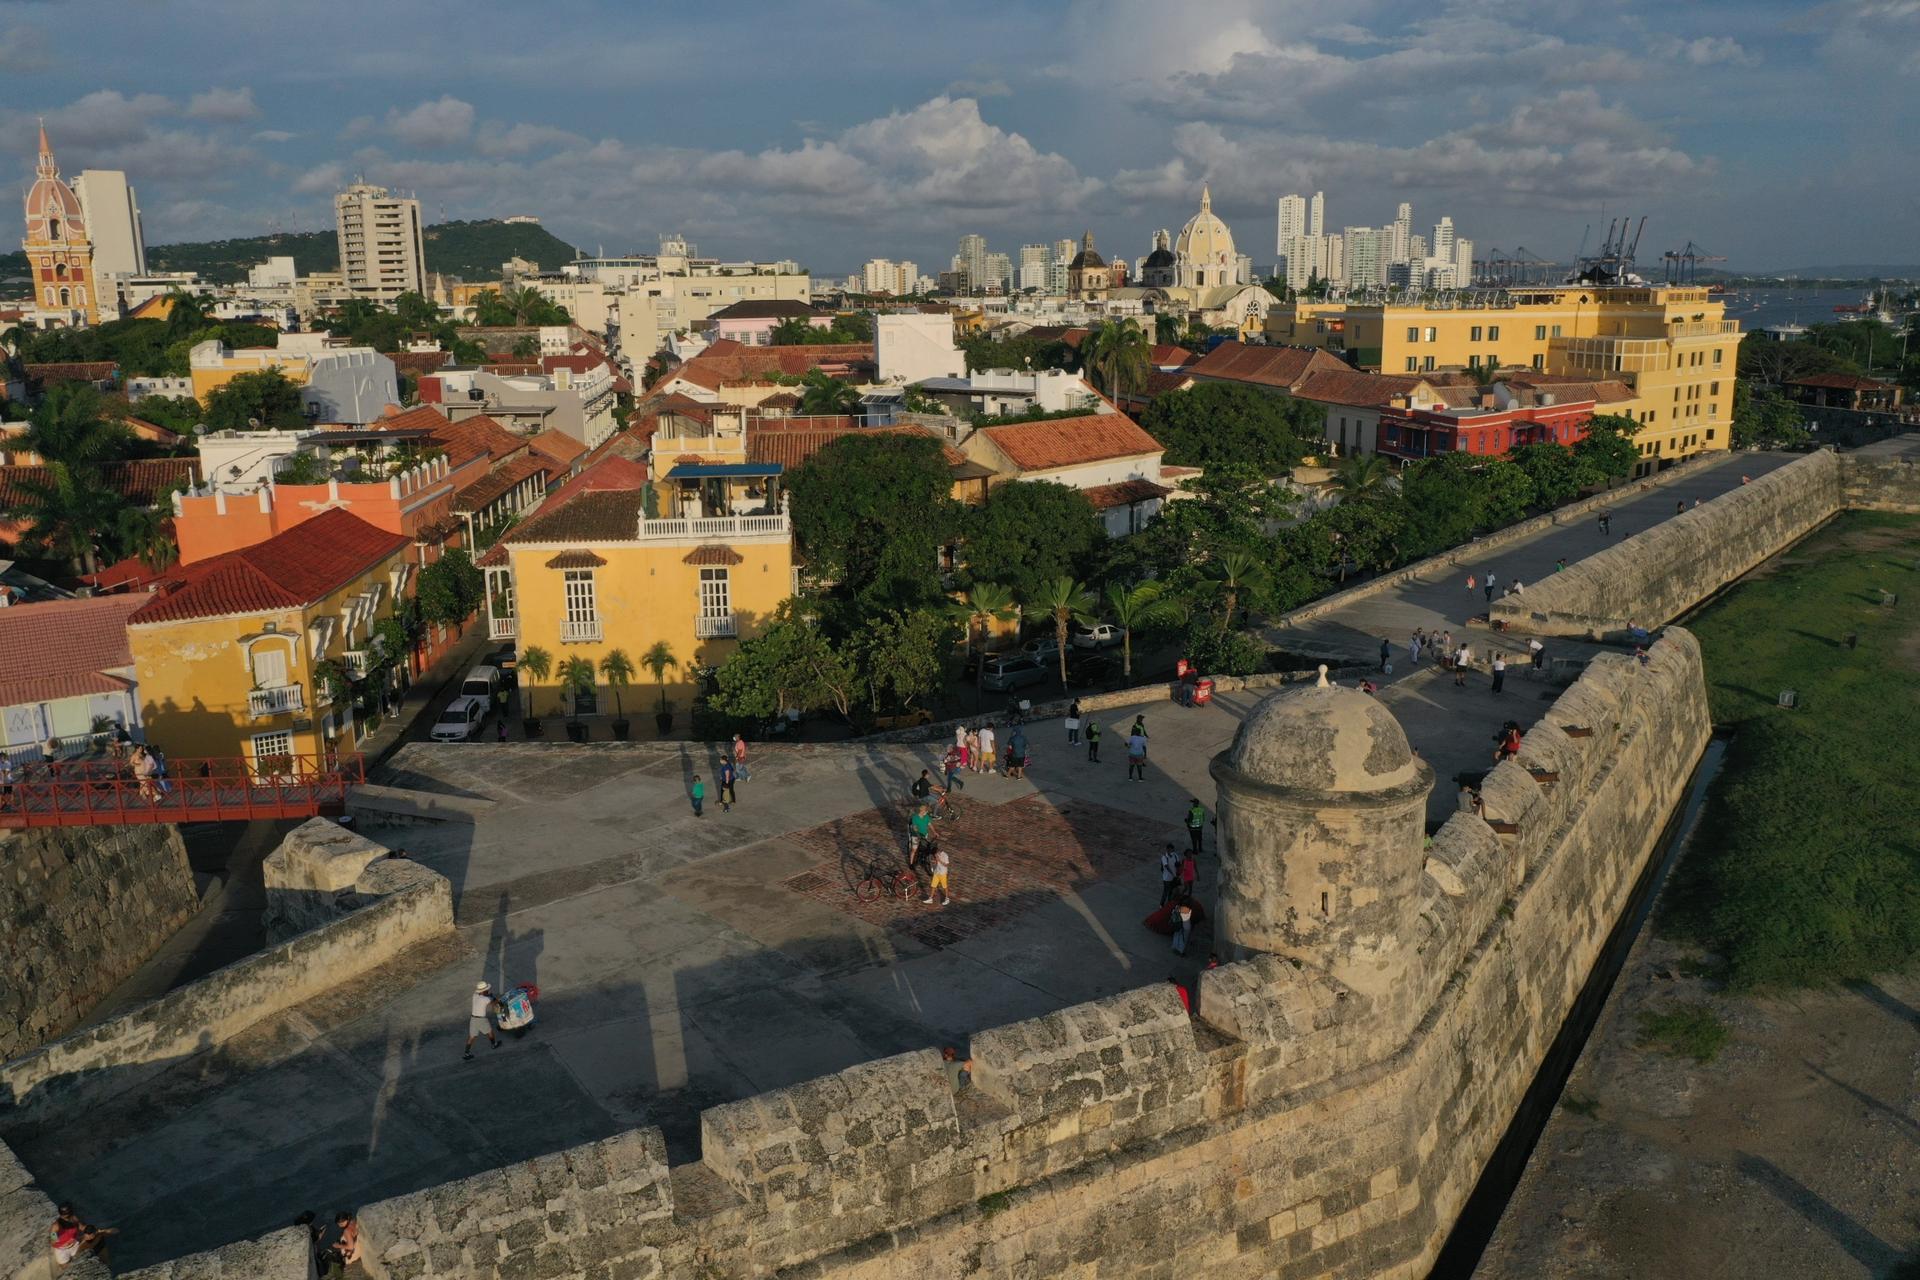 Cartagena's historical center is a UNESCO World Heritage site, and contains some of the best preserved examples of 18th century military architecture in the Caribbean. The city's walls were built with slave labor.